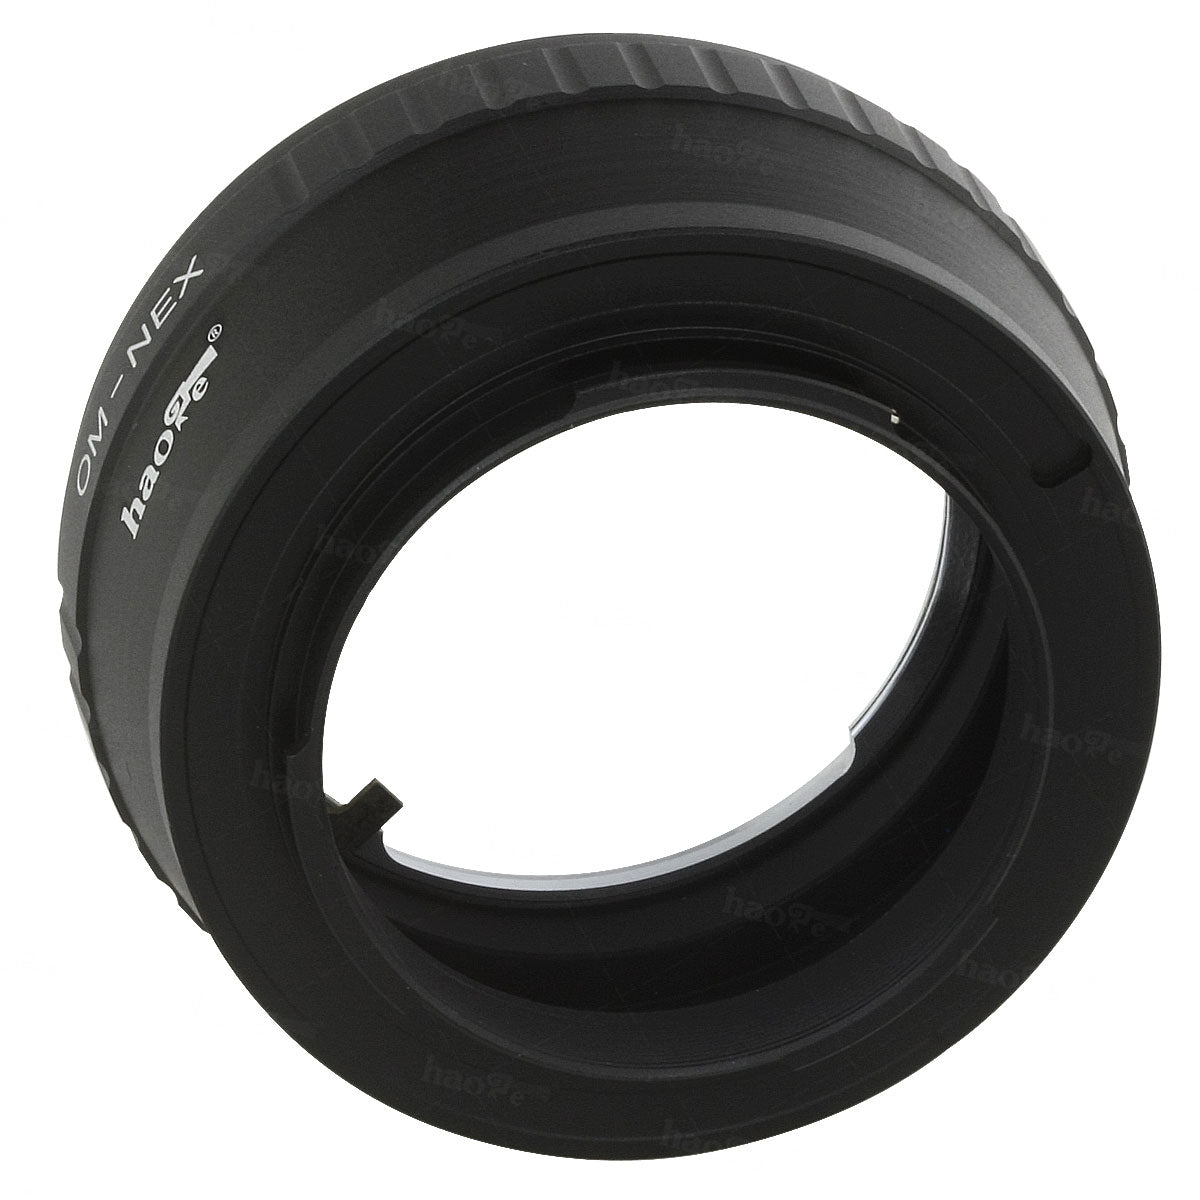 Haoge Lens Mount Adapter for Olympus Zuiko OM Mount Lens to Sony E-mount NEX Camera such as NEX-3, NEX-5, NEX-5N, NEX-7, NEX-7N, NEX-C3, NEX-F3, a6300, a6000, a5000, a3500, a3000, NEX-VG10, VG20